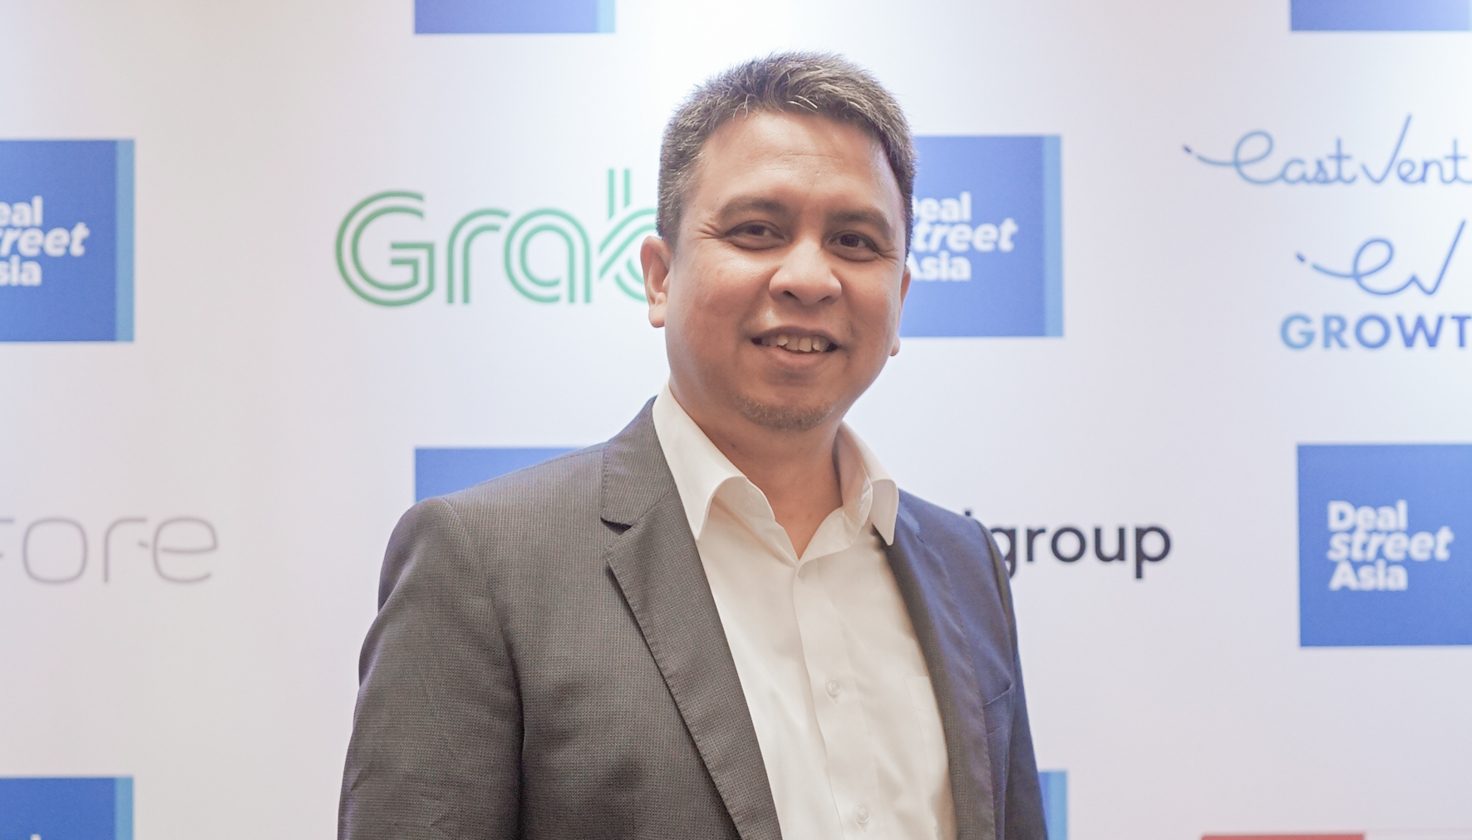 Grab to launch geo-mapping services in Indonesia this year amid EV push